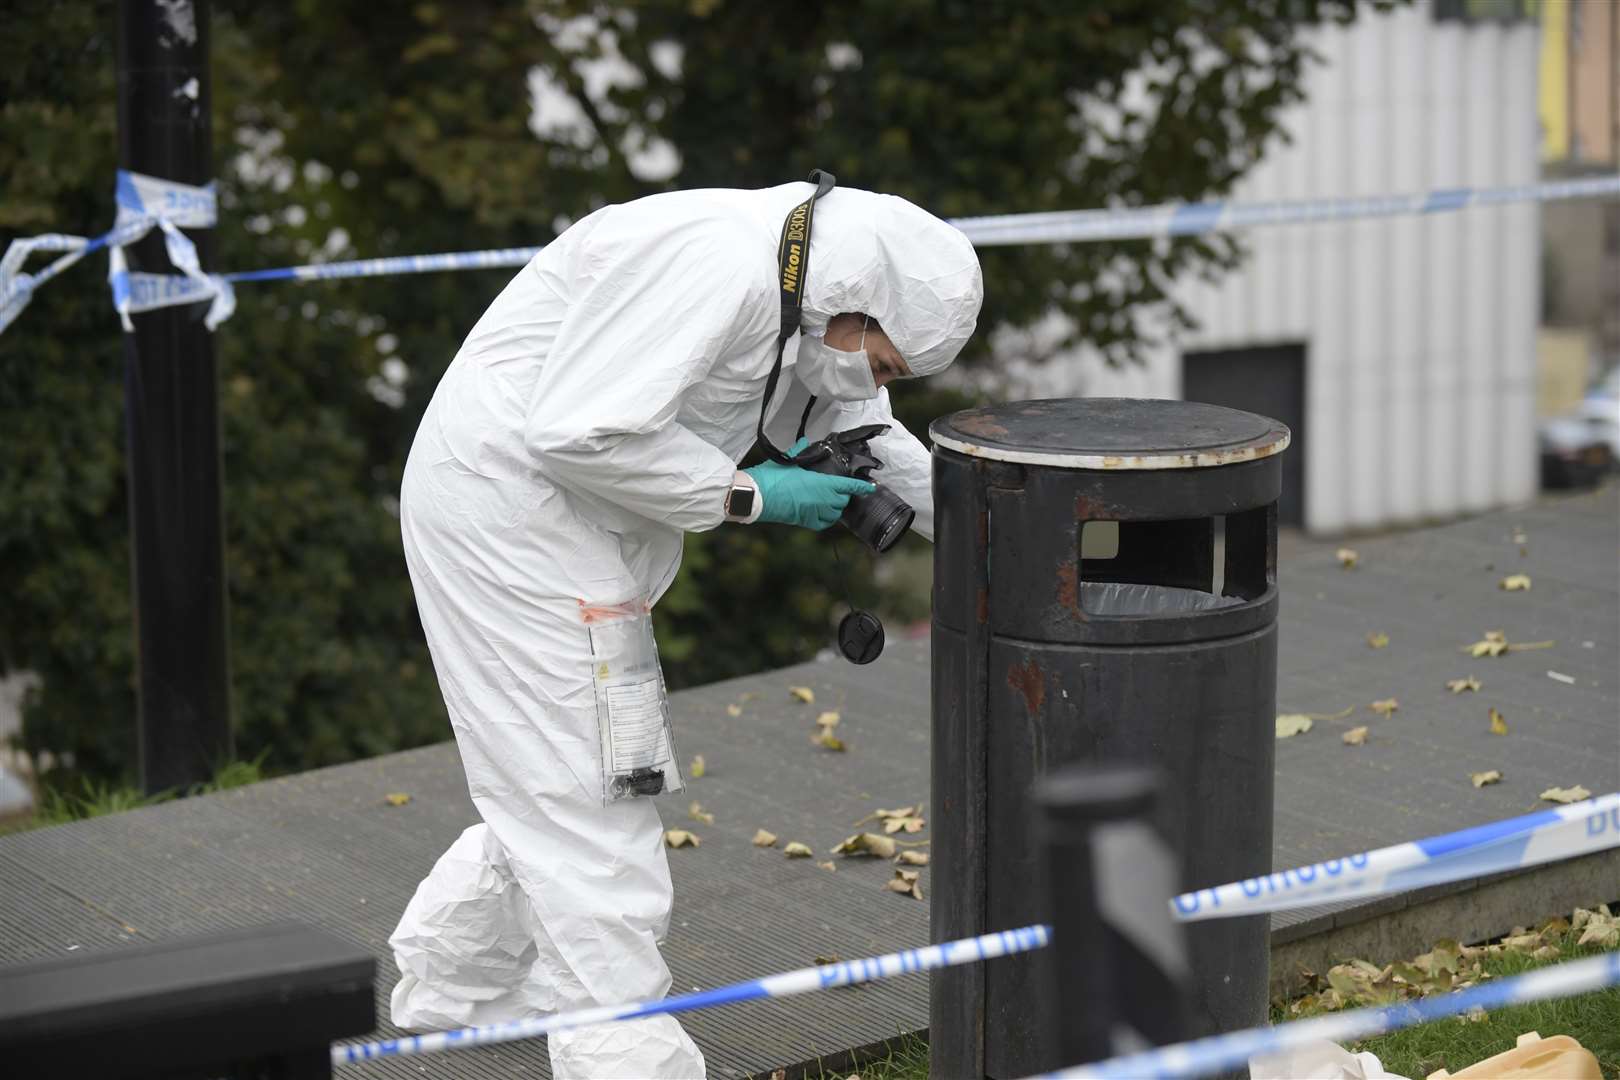 A forensic officer investigating the scene. Picture: Barry Goodwin